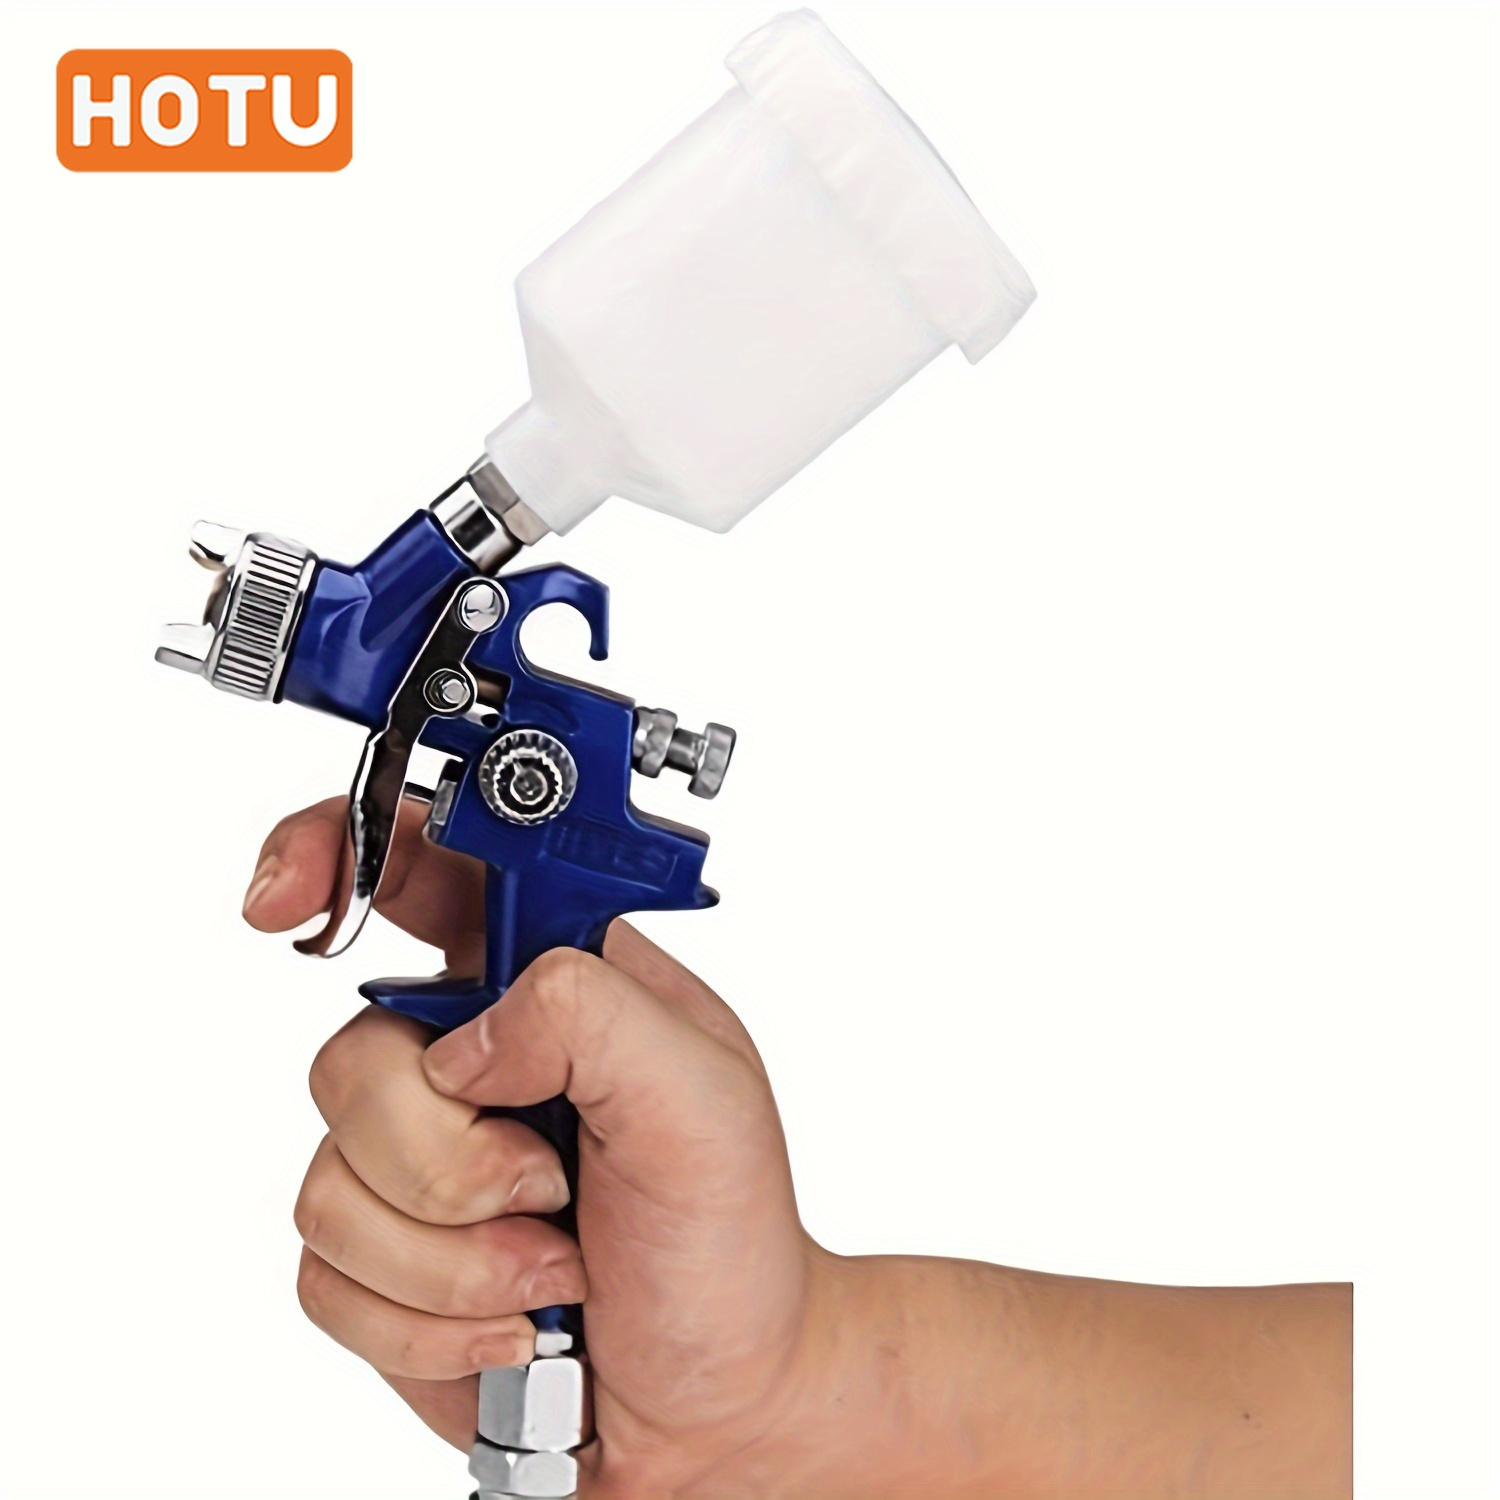 

Stainless Steel Spray Gun With 1.0mm Tip For Car Spraying, Gravity Feed Paint Gun With 125ml Capacity Cup For Car Prime And Furniture Surface Spraying